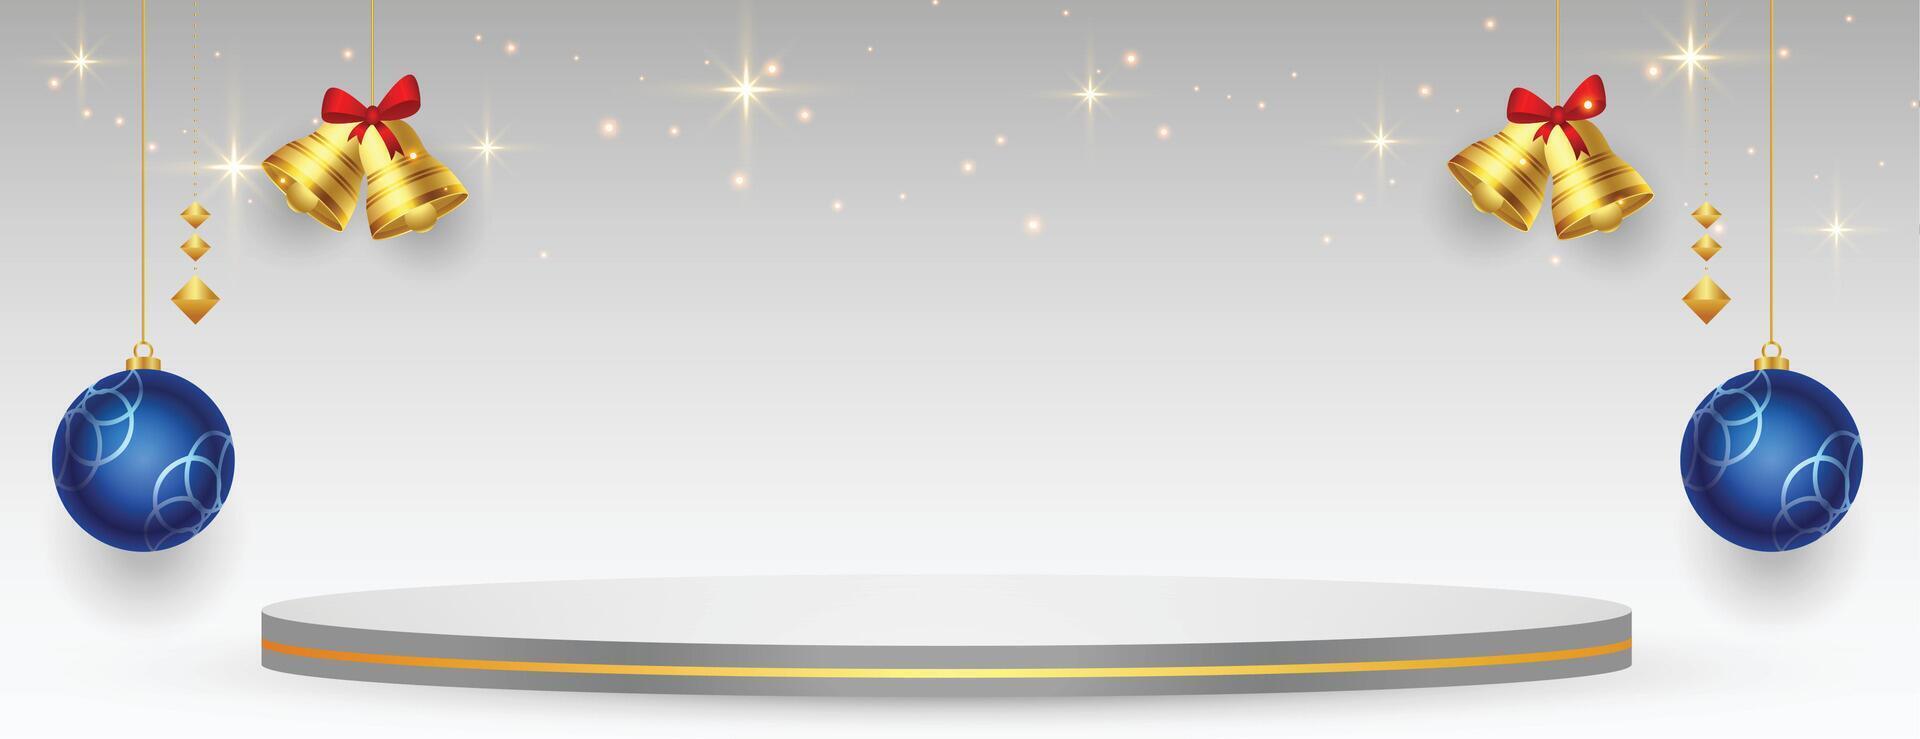 silver 3d podium platform for merry christmas holiday banner vector